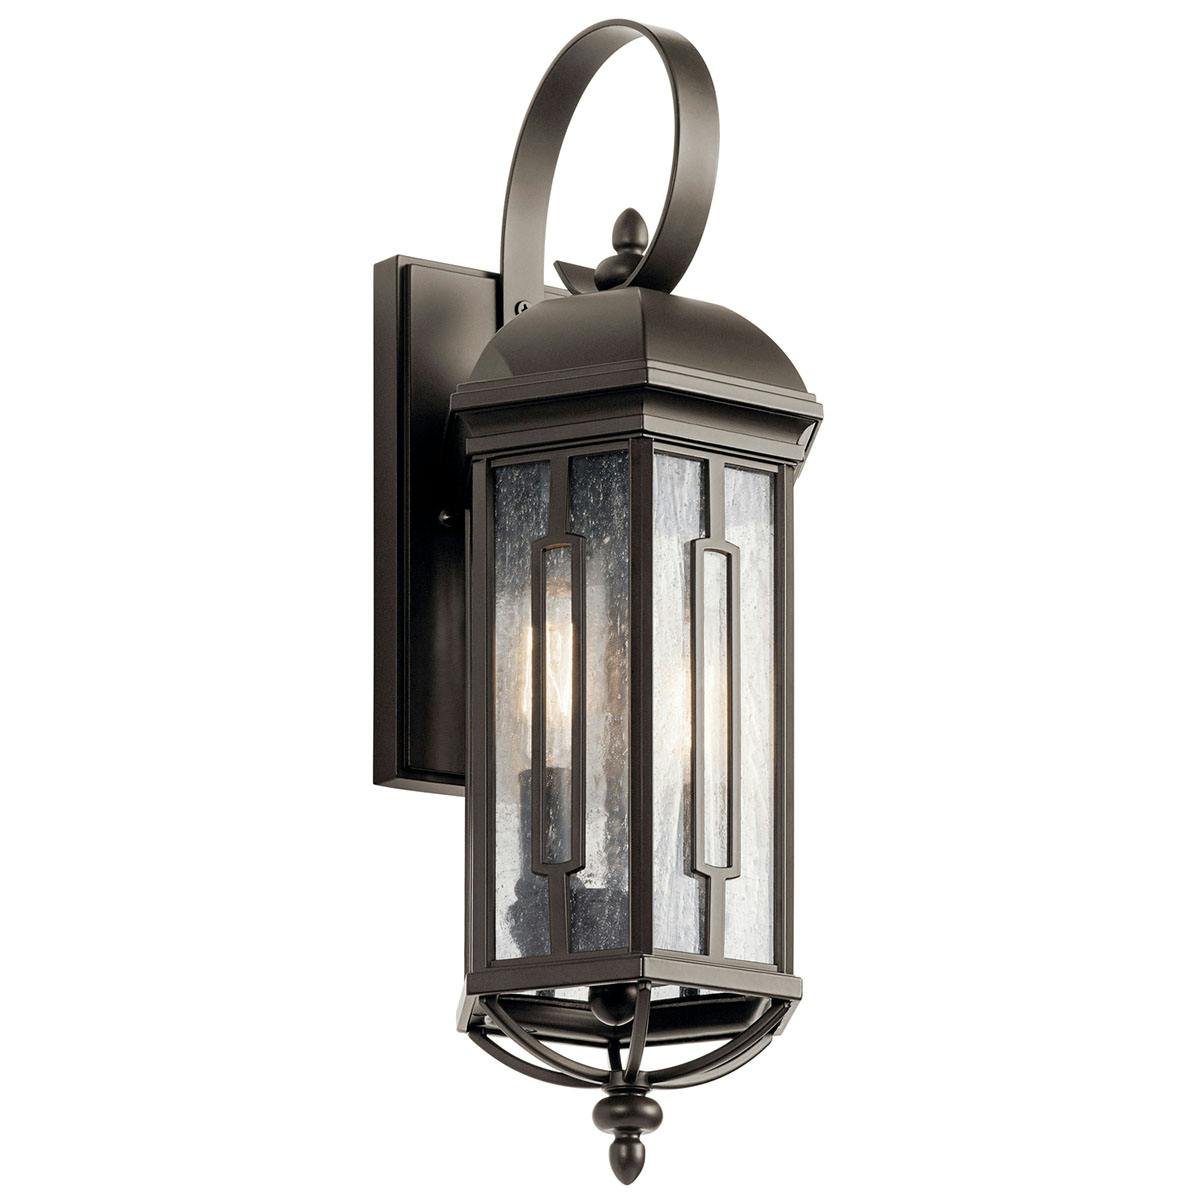 Galemore 2 Light Wall Light Olde Bronze® on a white background